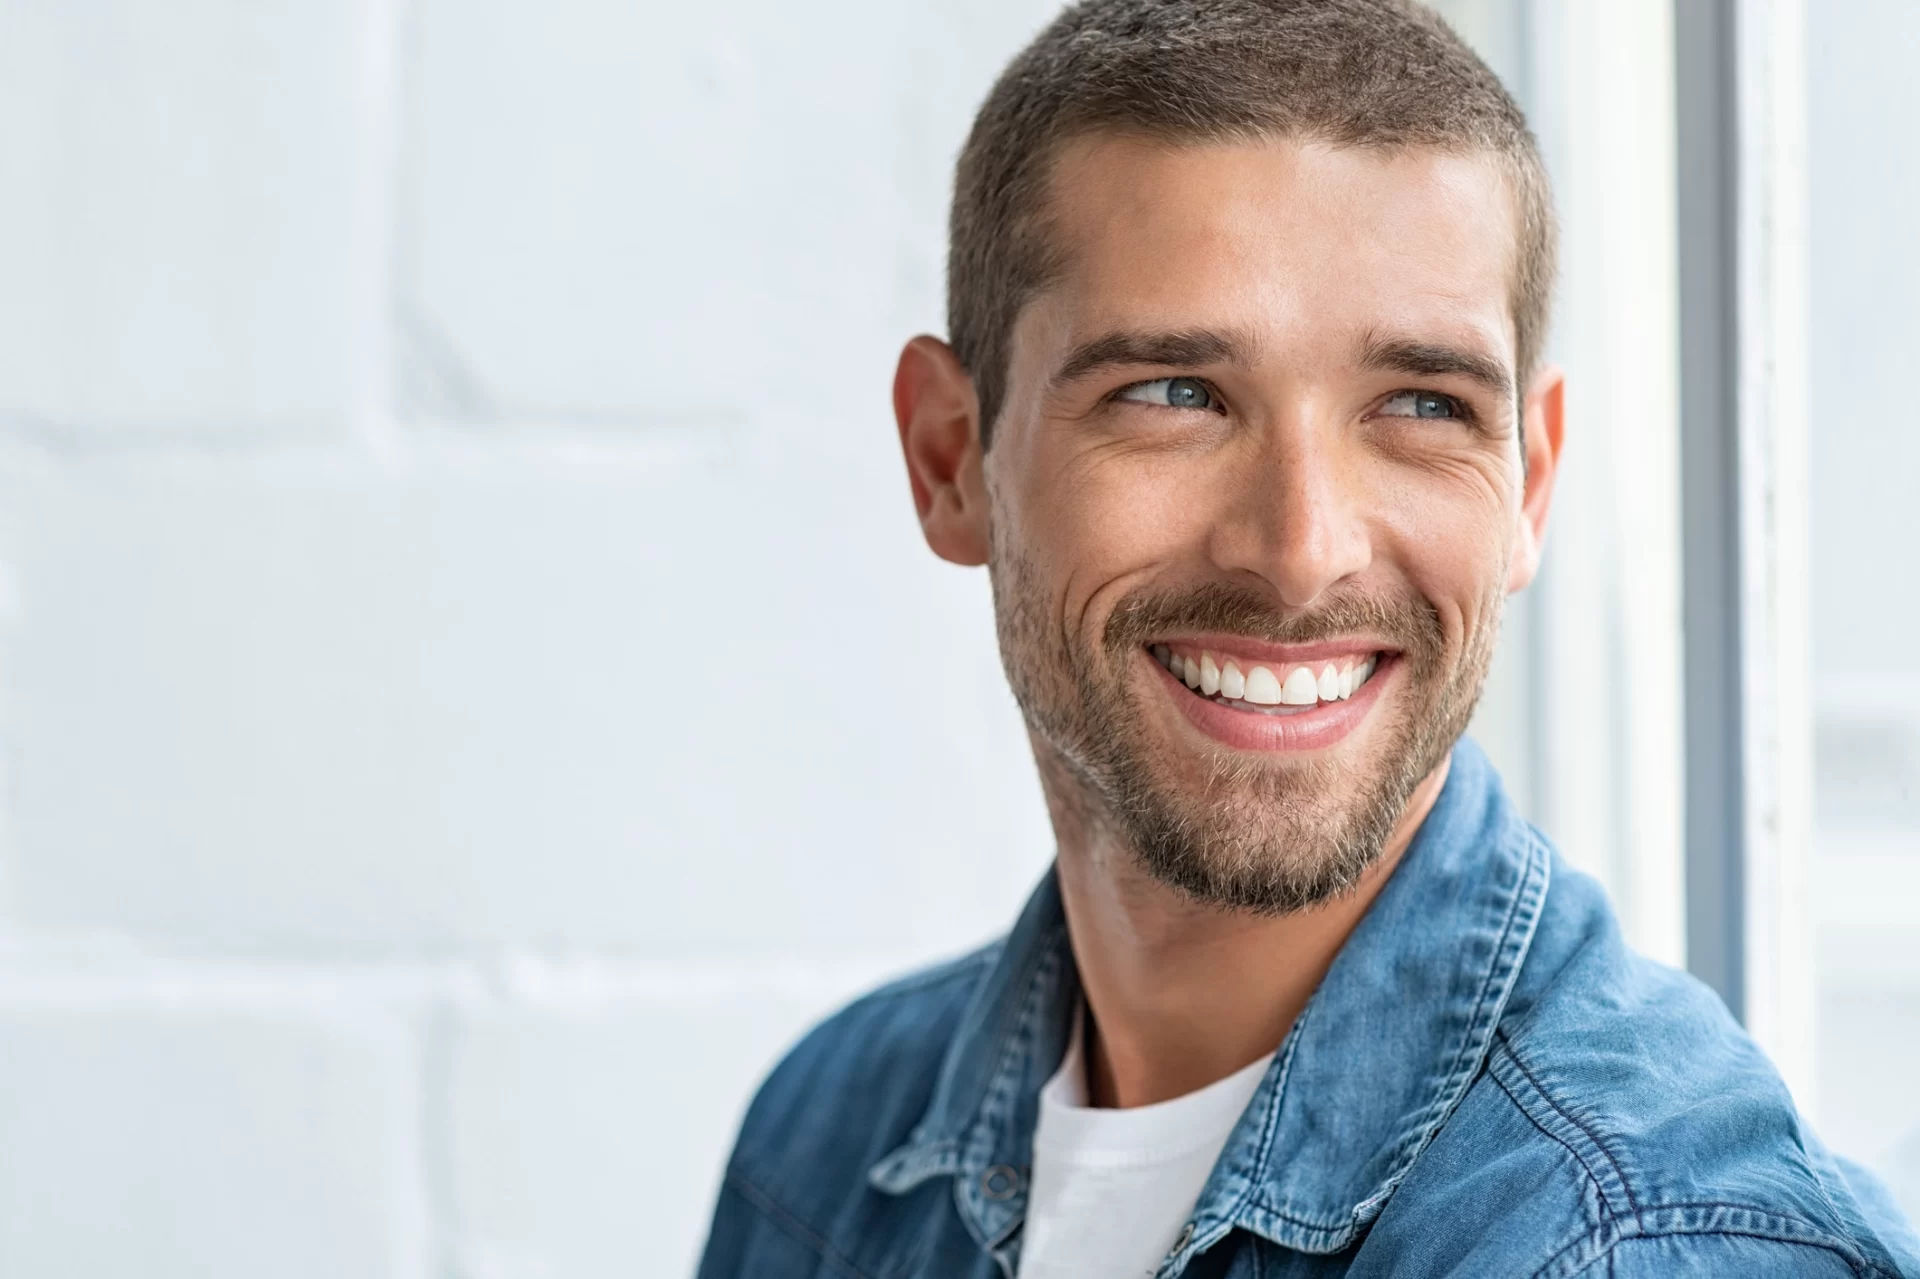 close up portrait of man with a pretty white smile